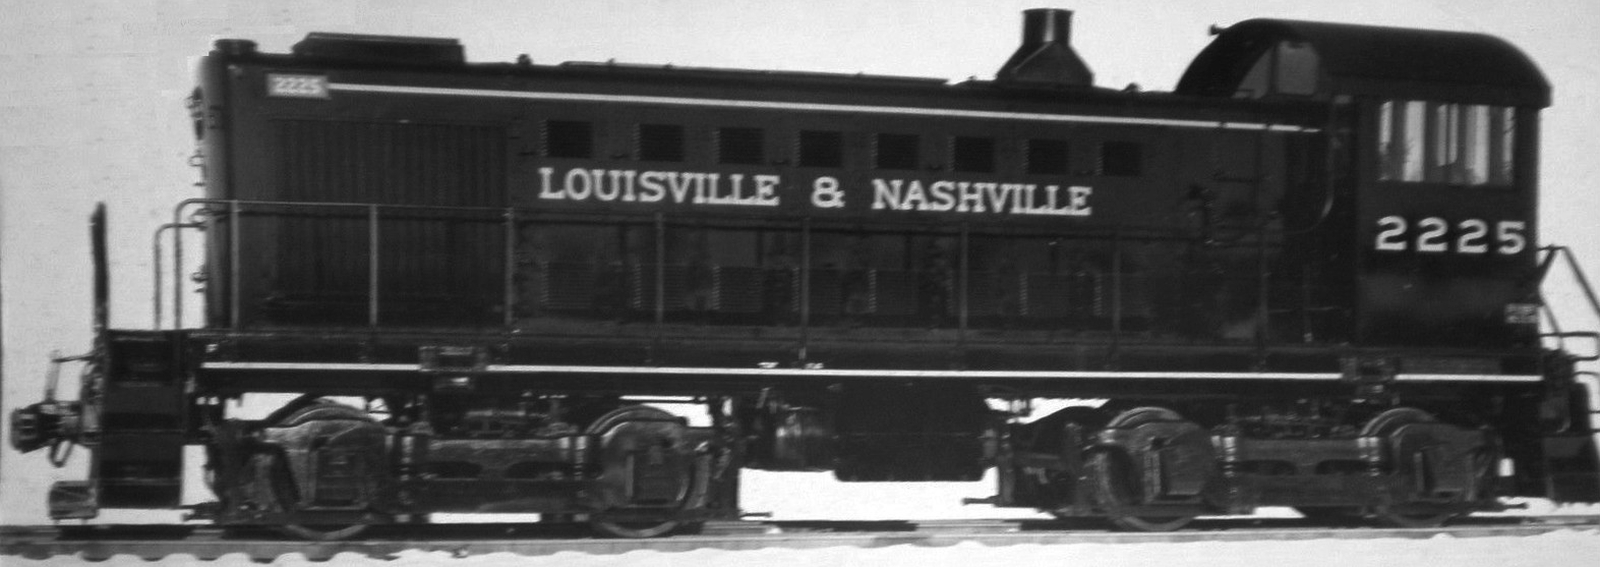 Works photo of Louisville and Nashville No. 2225, an S-4